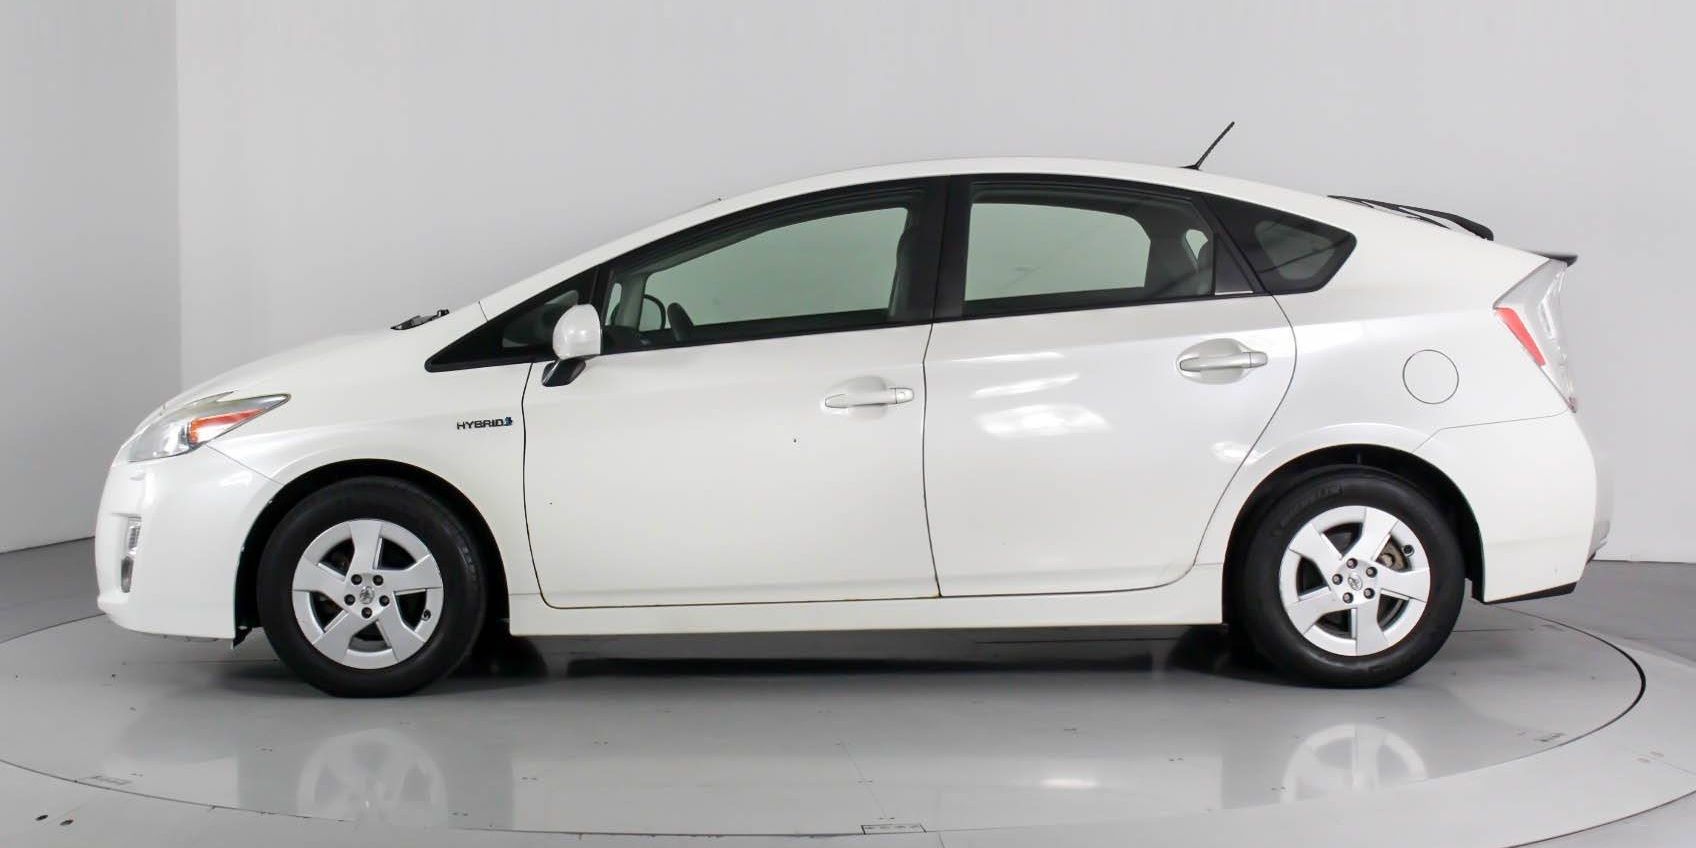 Toyota Prius 2010 in white in a showroom